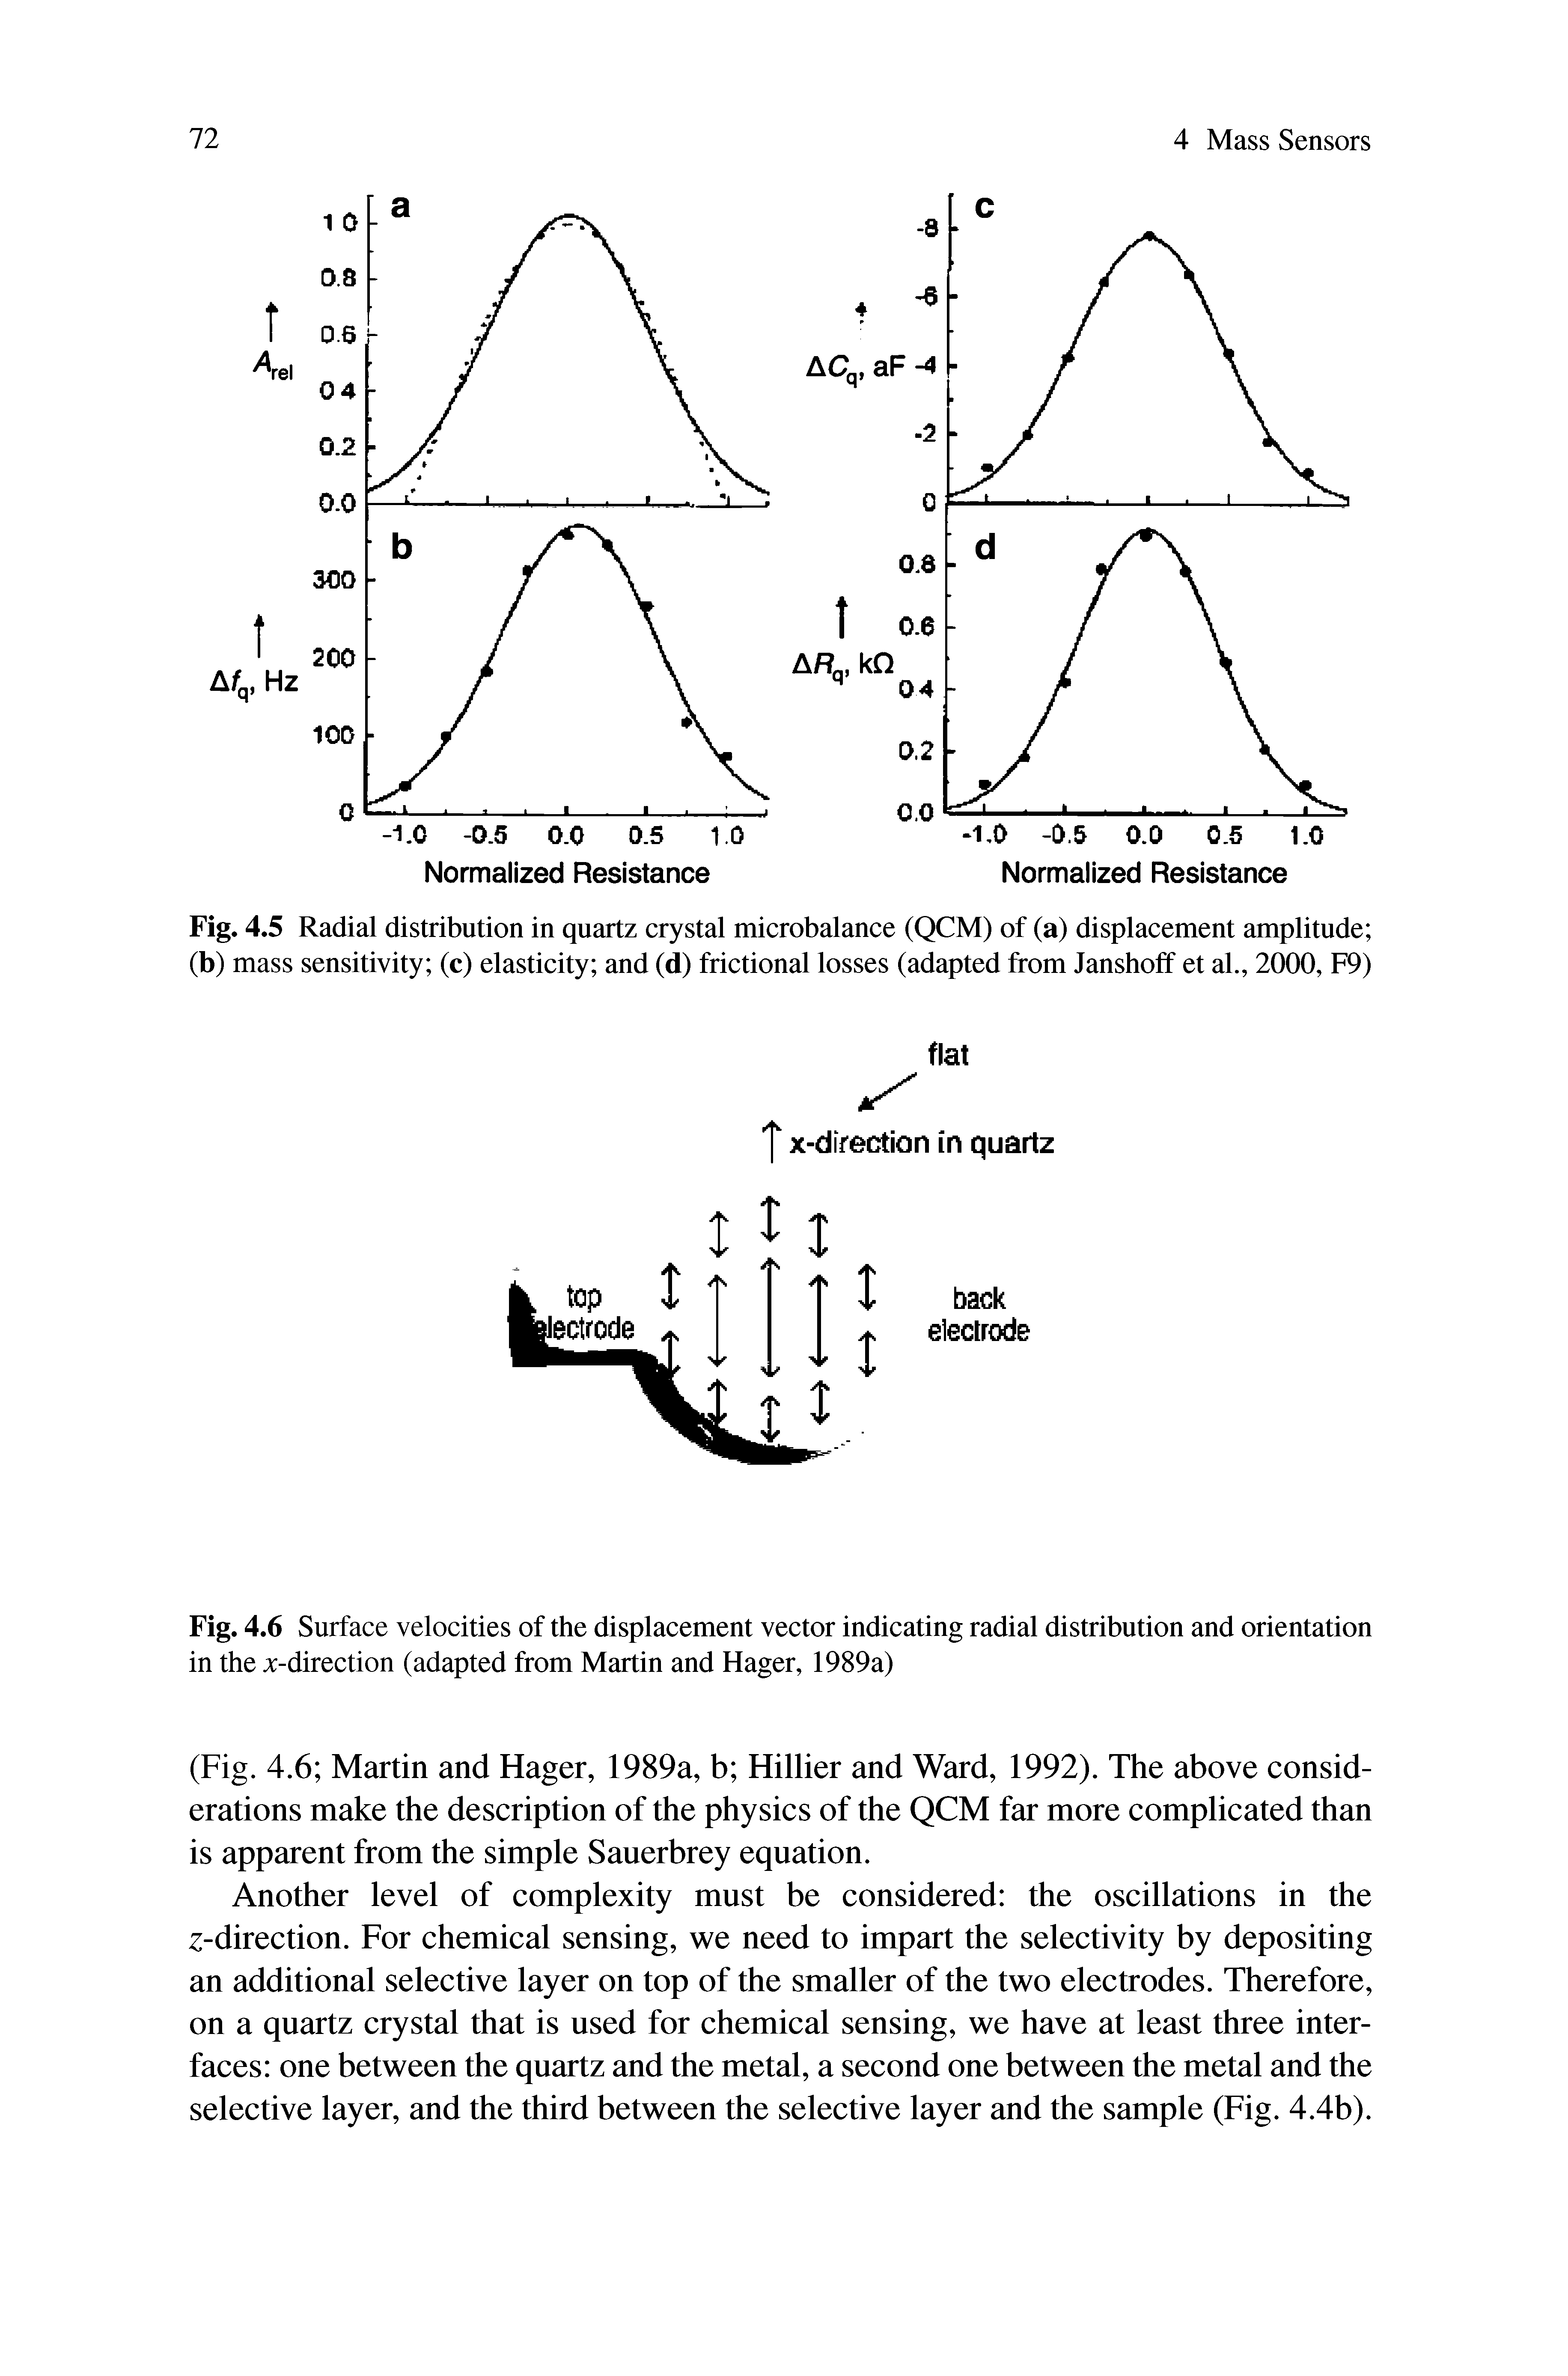 Fig. 4.6 Surface velocities of the displacement vector indicating radial distribution and orientation in the x-direction (adapted from Martin and Hager, 1989a)...